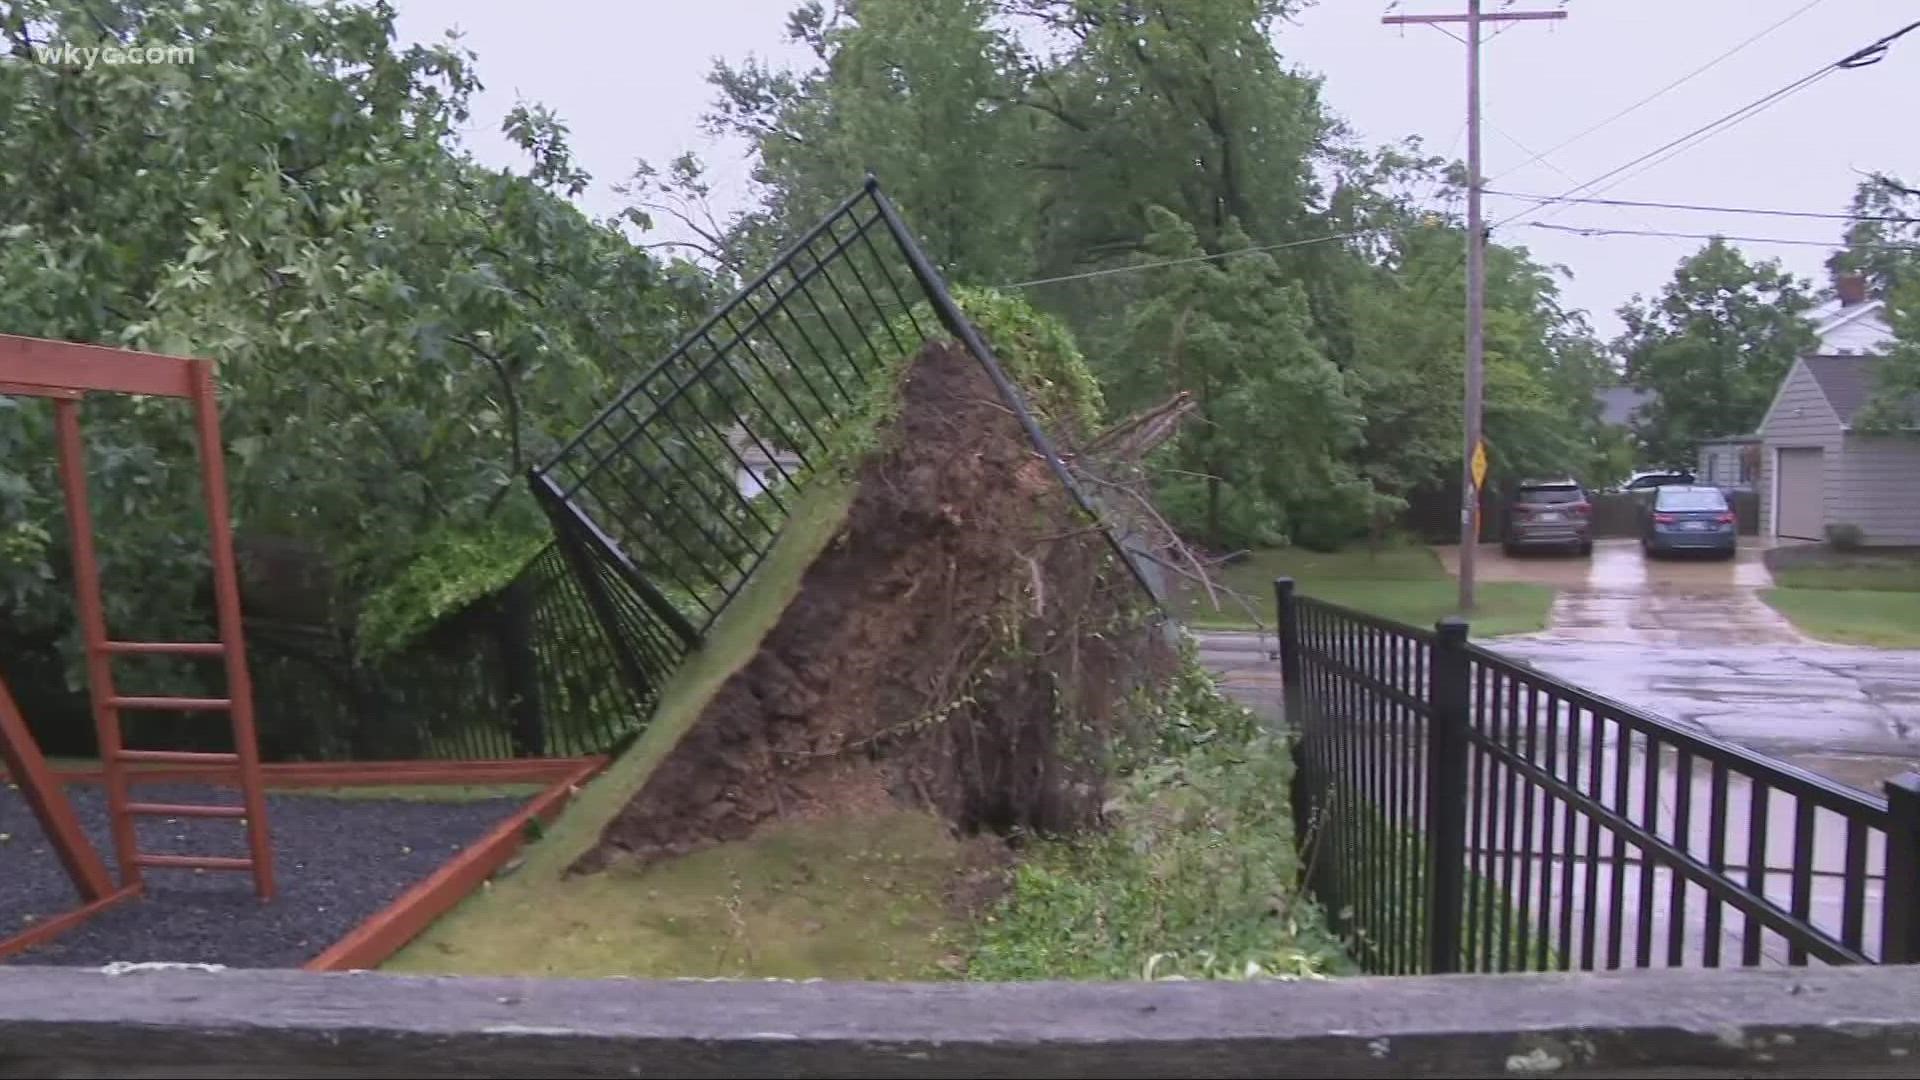 The thunderstorms are officially moving out of Northeast Ohio, but not without leaving damage in their wake. One Bay Village resident had their tree ripped up!